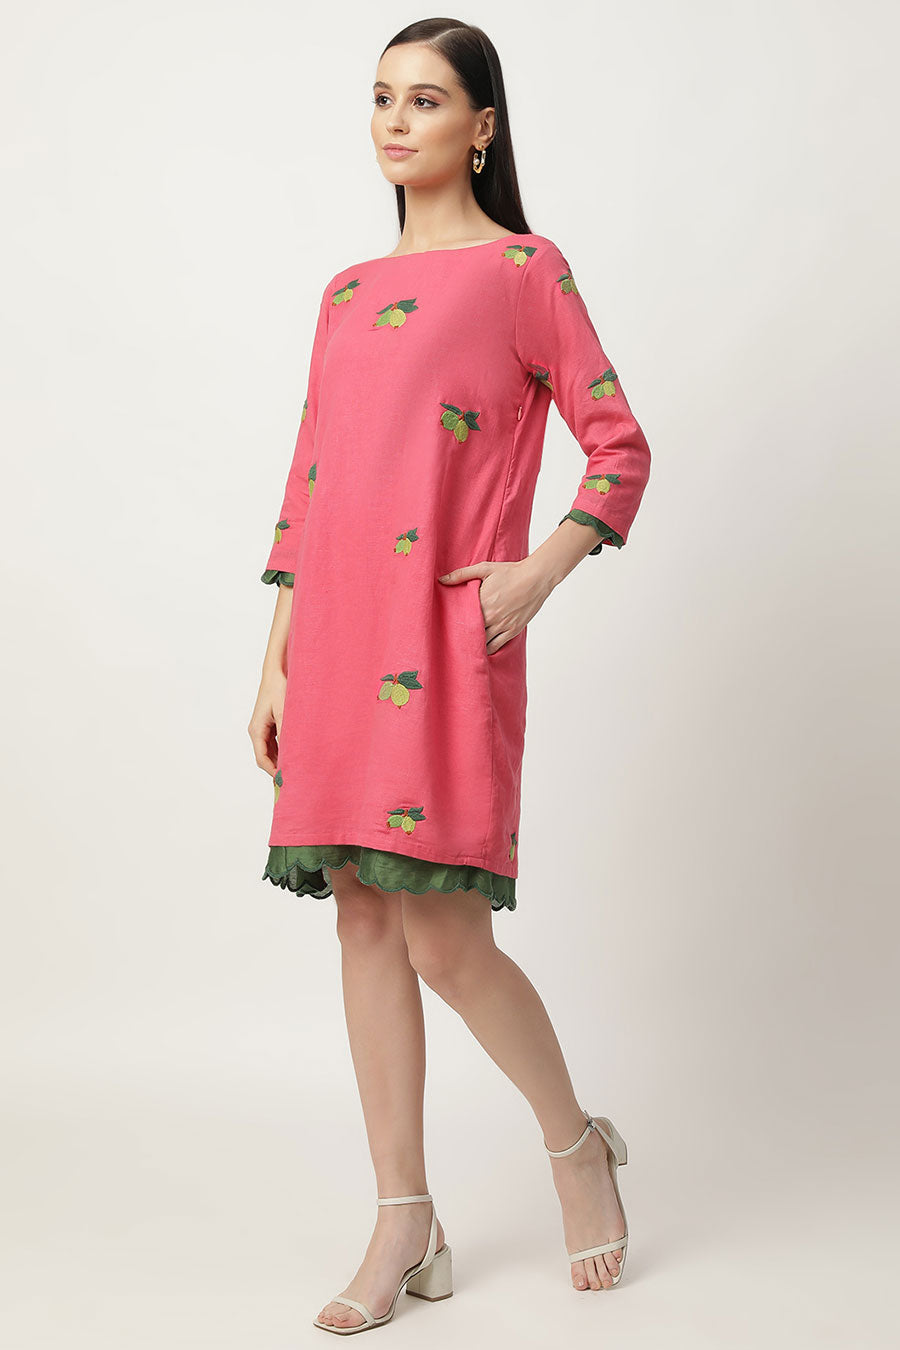 Candy Pink Embroidered Dress